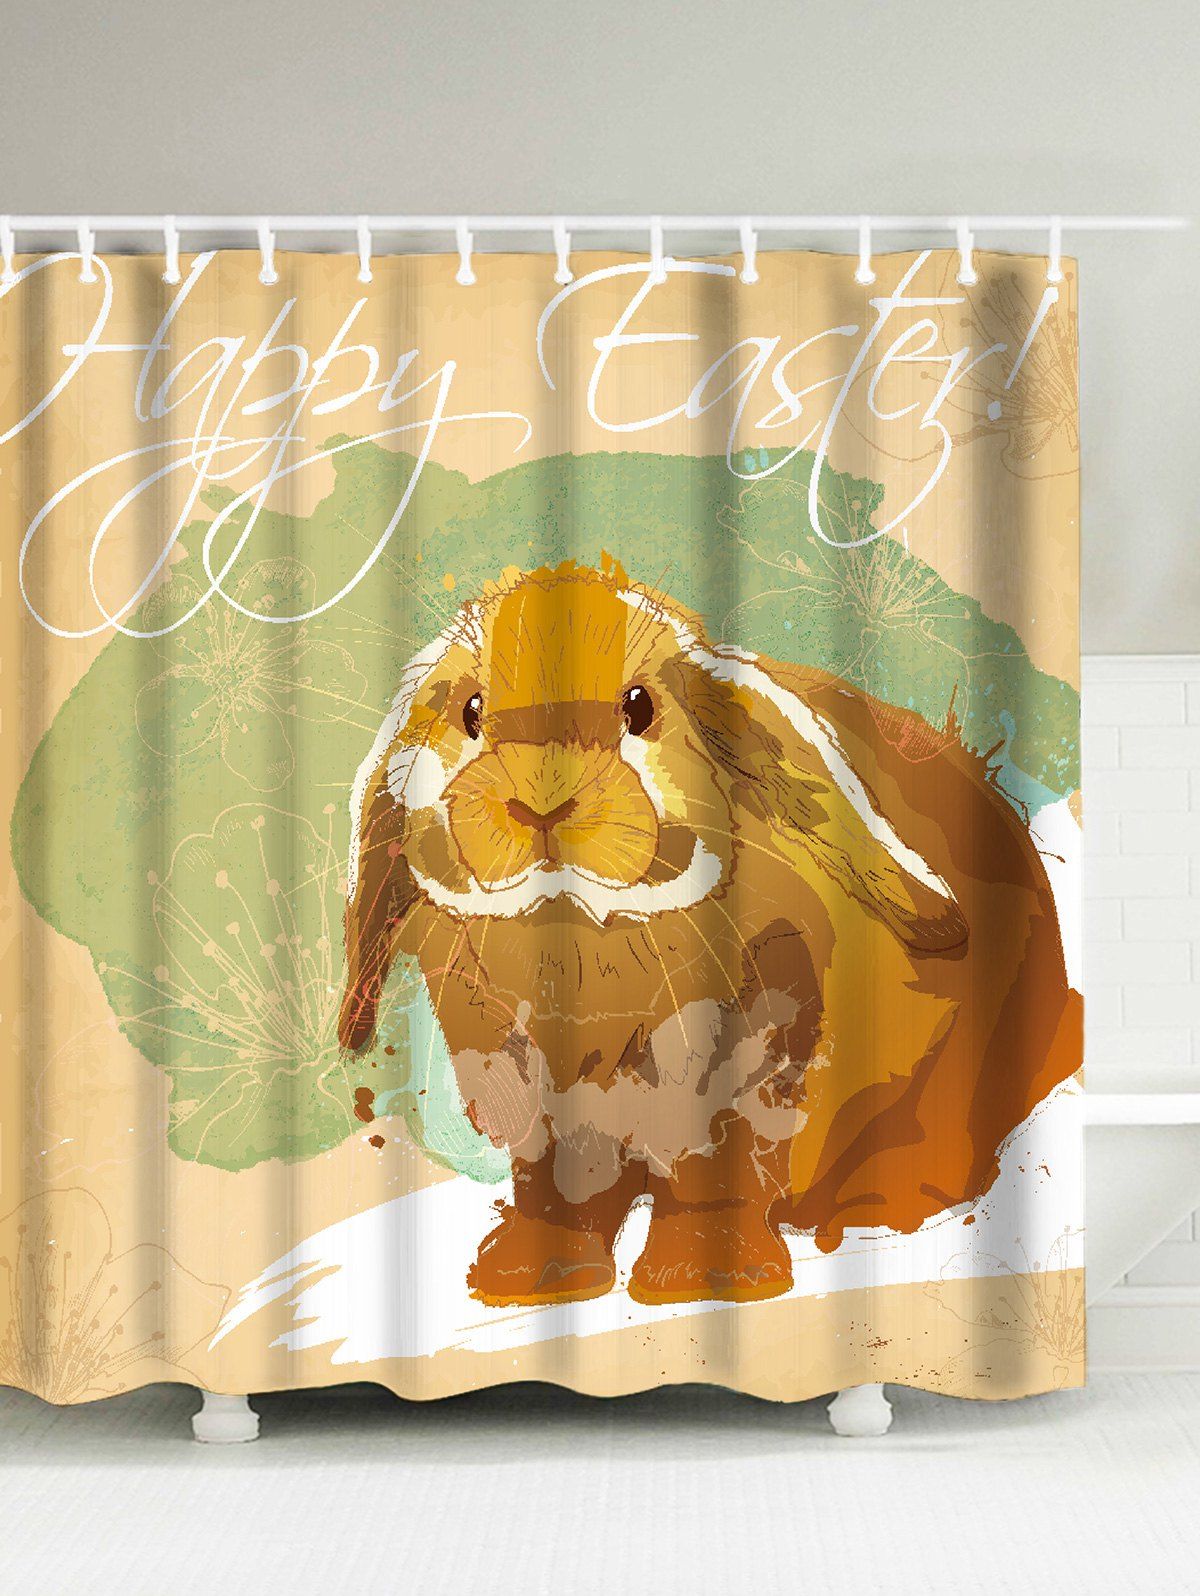 

Happy Easter Rabbit Print Waterproof Shower Curtain, Colormix